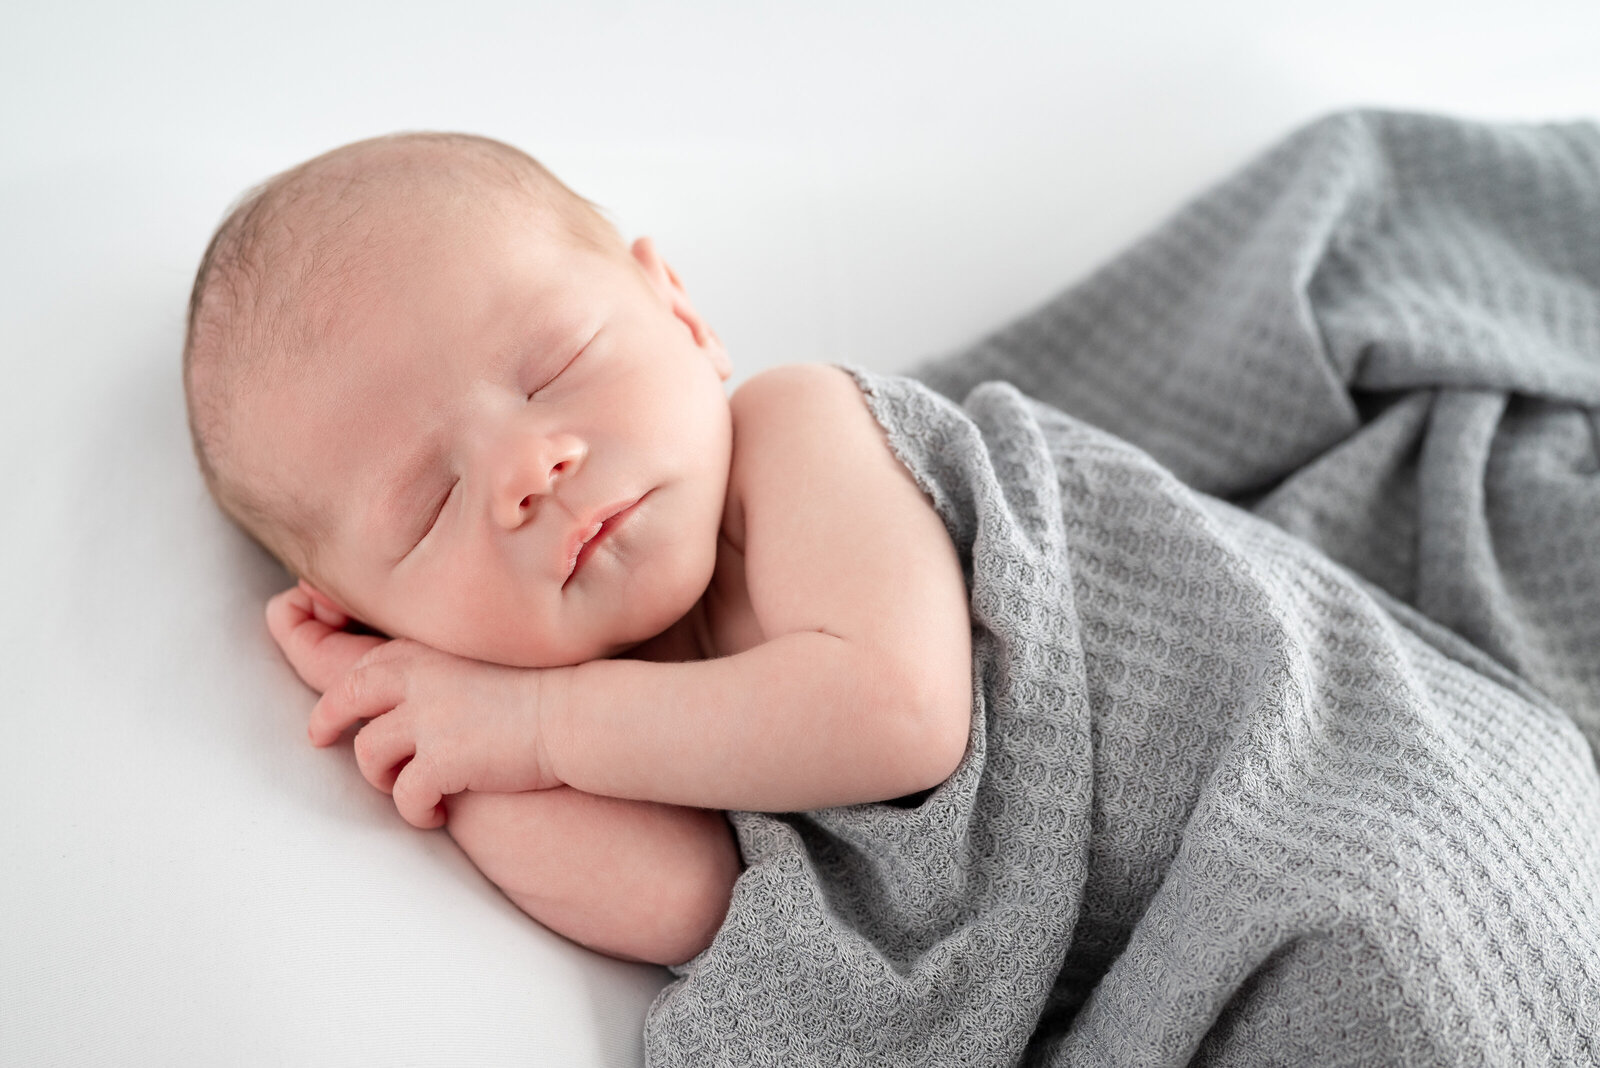 A baby sleeping  on his side during newborn photos at a studio in alabama